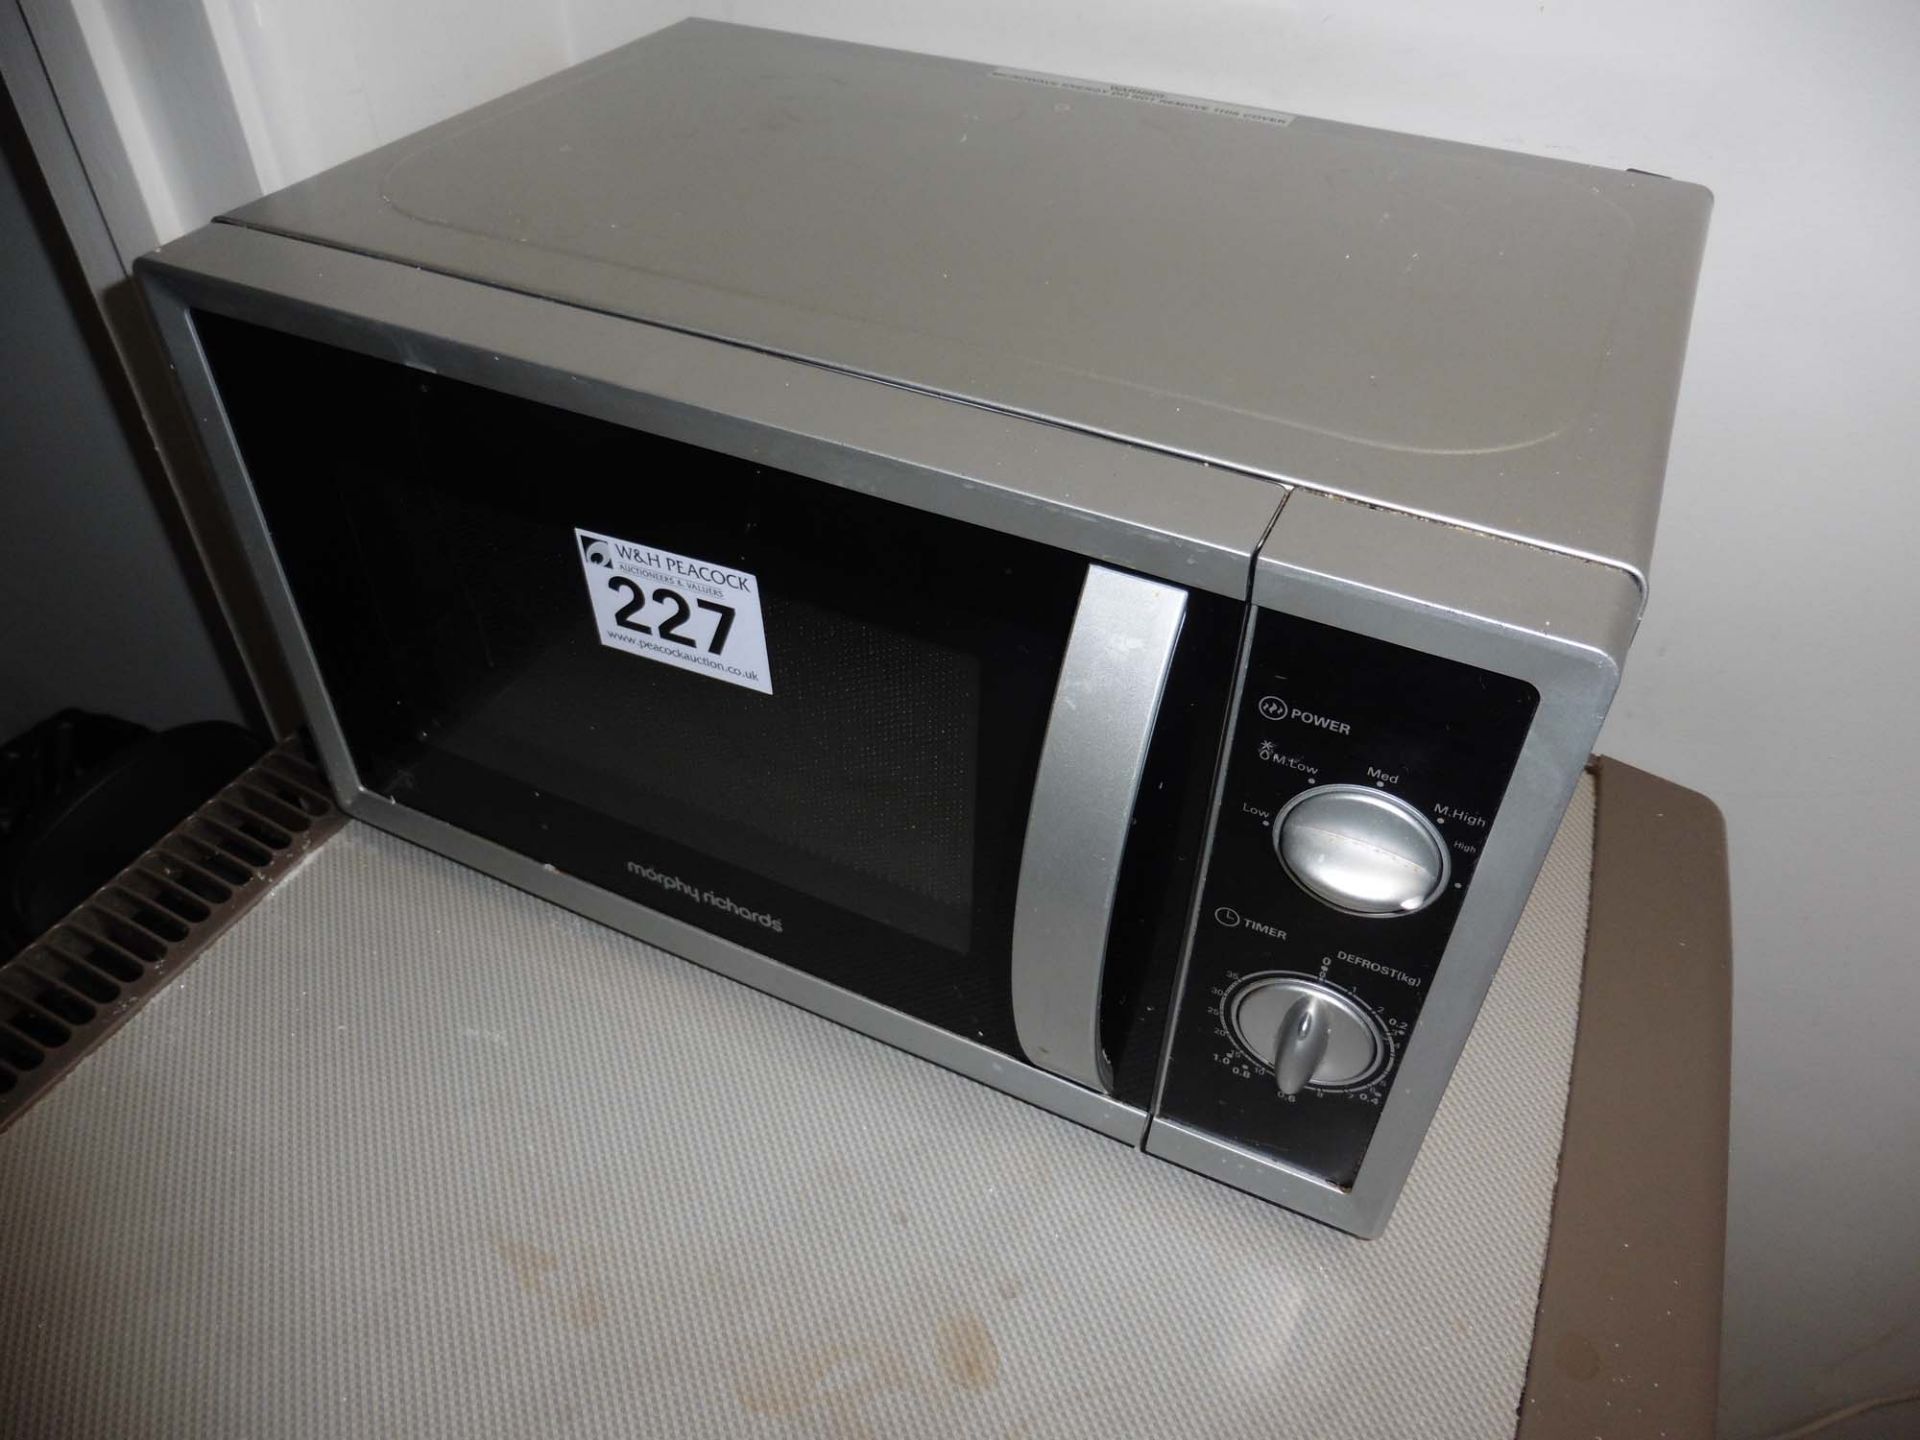 Contents of kitchen including Hotpoint refrigerator, Morphy Richards microwave and kettle